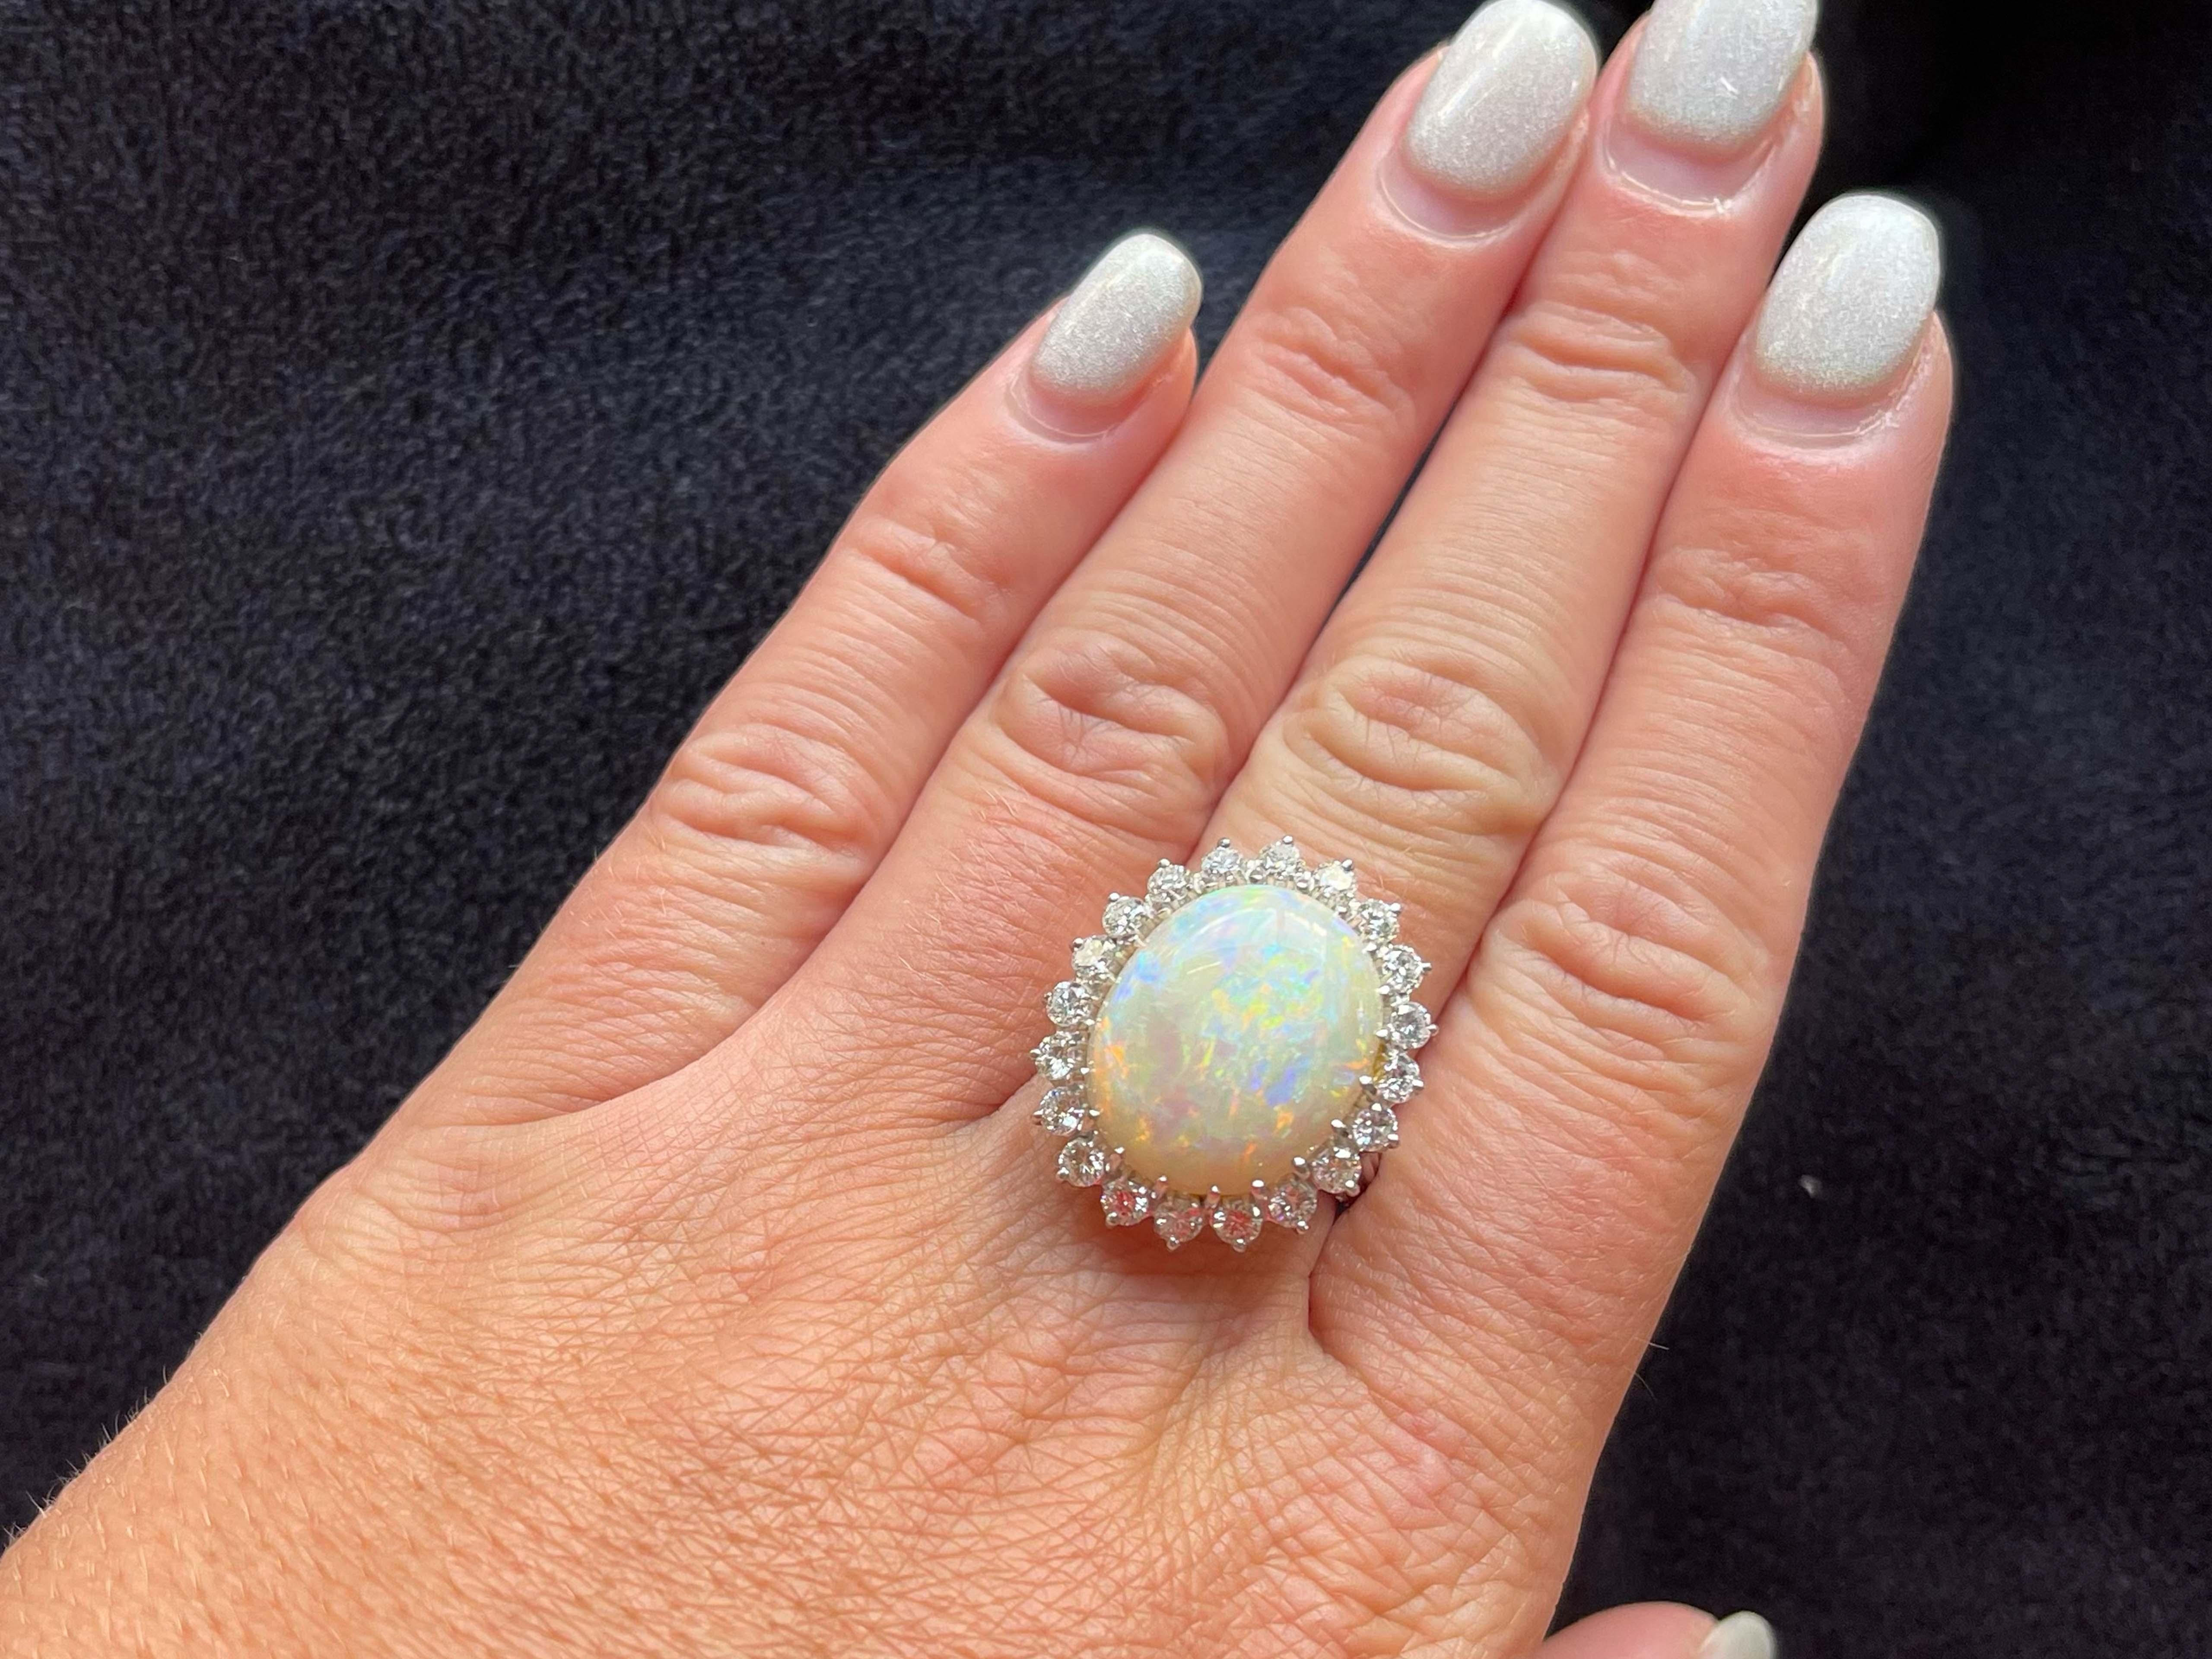 Item Specifications:

Metal: 14K White Gold 

Style: Opal and Diamond Ring

Total Weight: 7.3 Grams
​
​Ring Size: and 8.25 (resizing available for a fee)

Gemstone Specifications:

Center Gemstone: Ethiopian Opal

Gemstone Measurements: 18.5 mm x